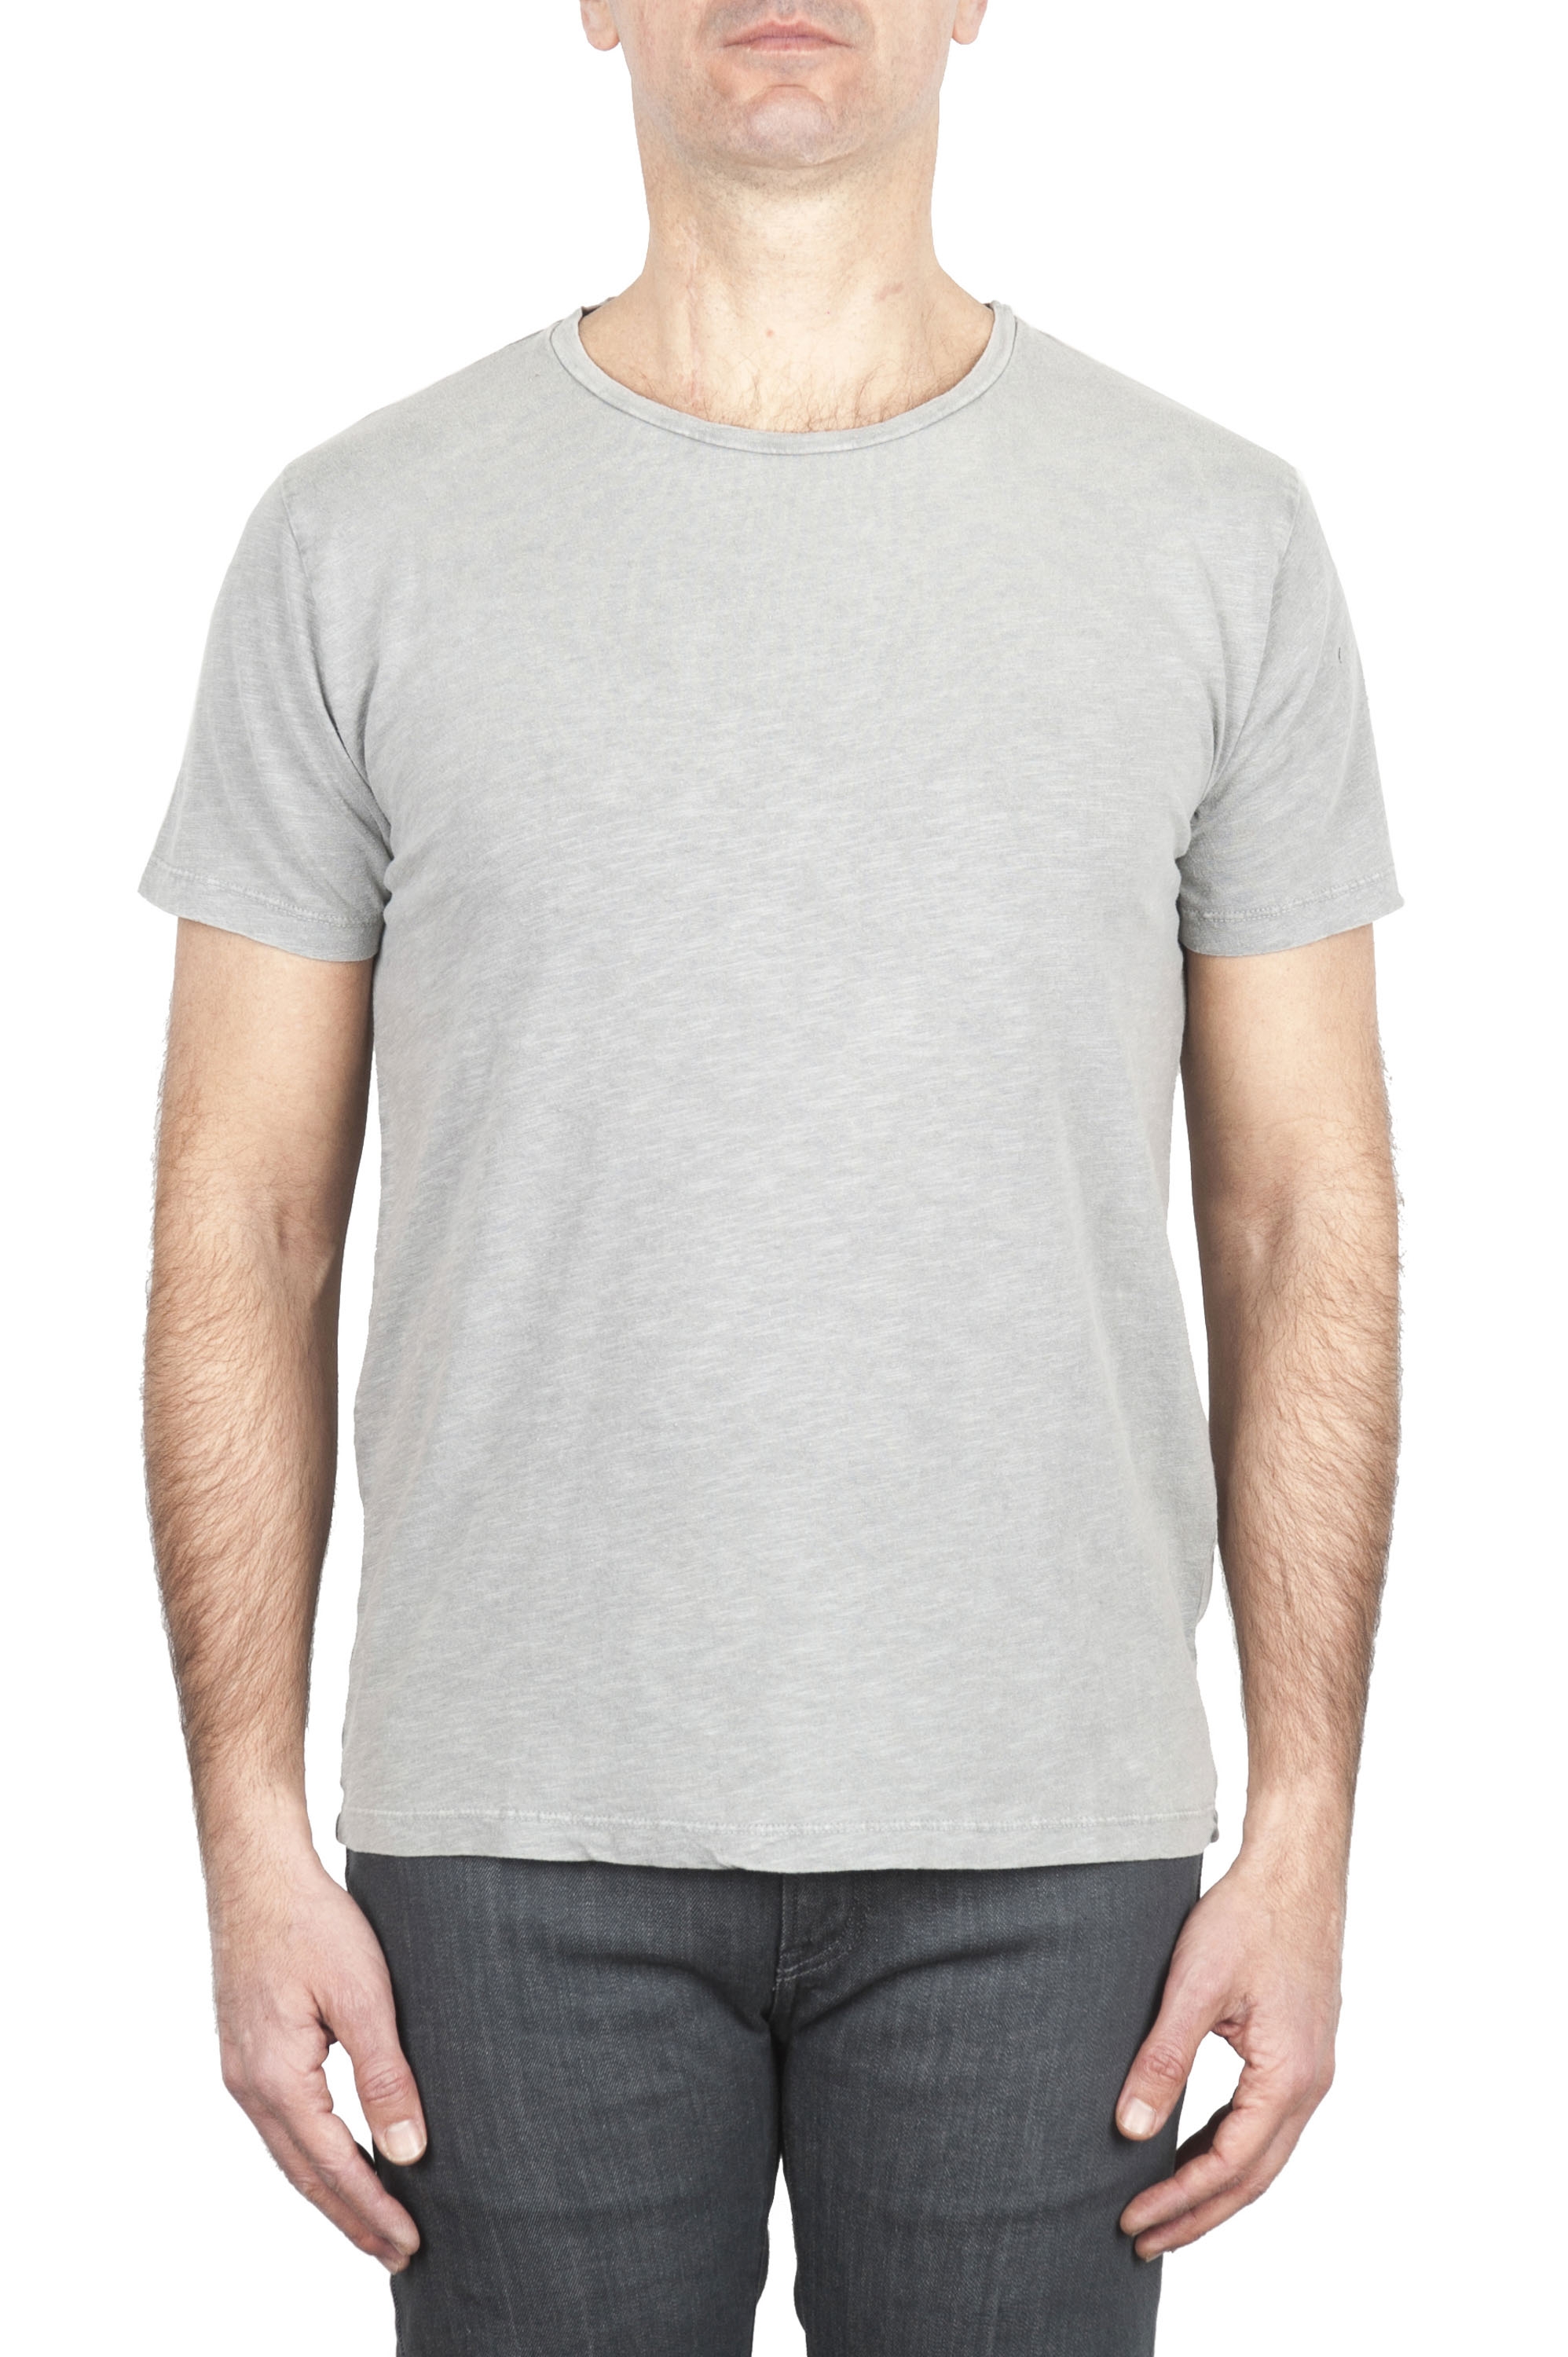 SBU 01971_2020SS Flamed cotton scoop neck t-shirt pearl grey 01